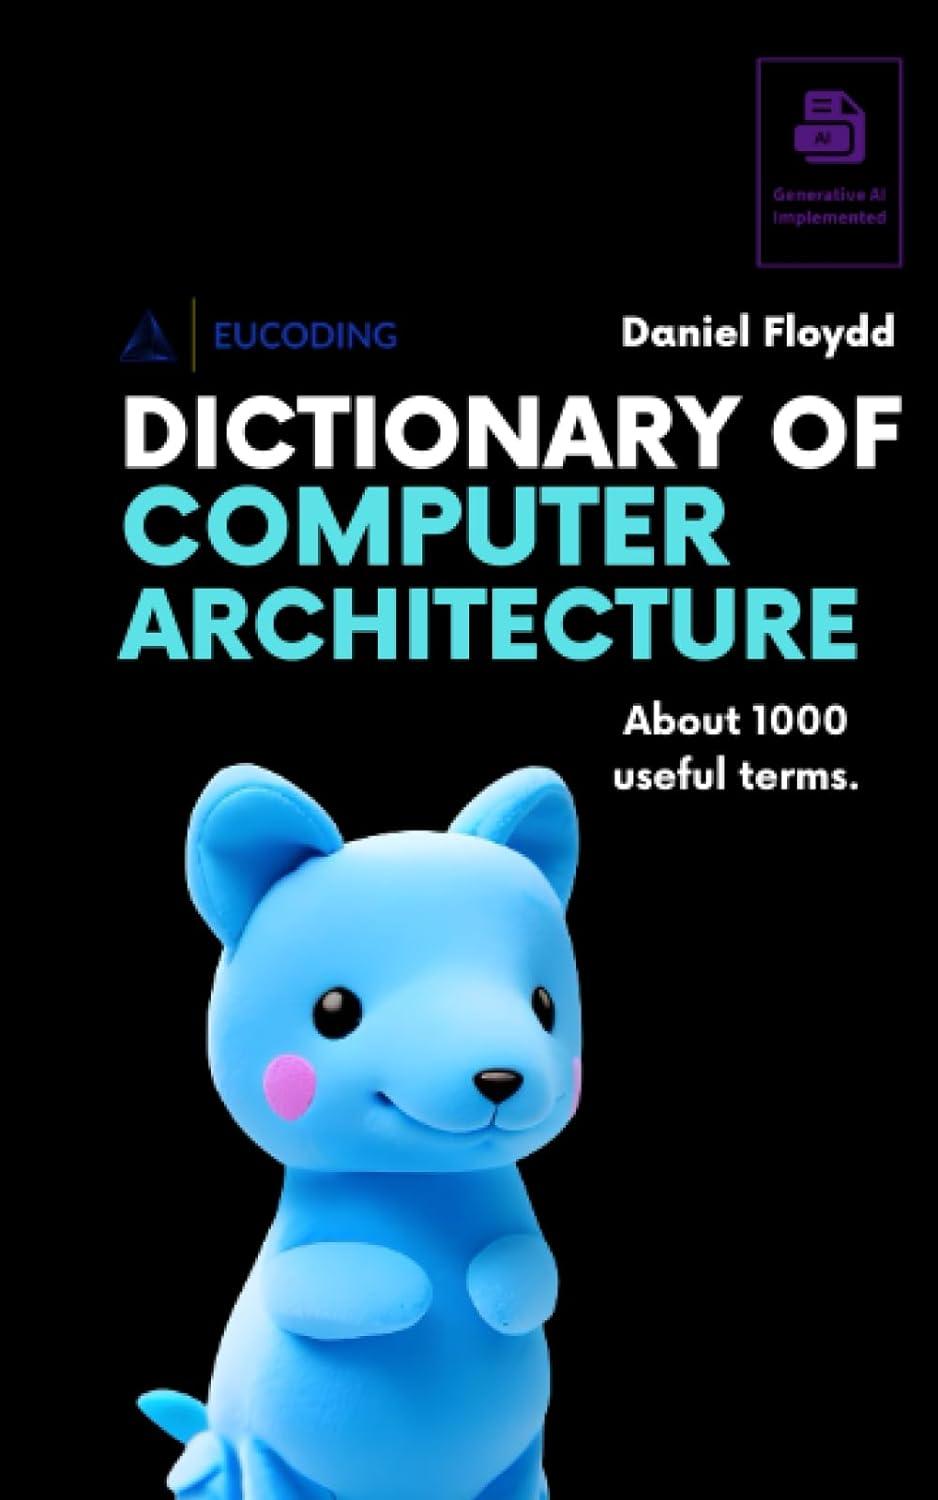 dictionary of computer architecture one thousand useful terms 1st edition daniel floydd b0cfchm9kz,